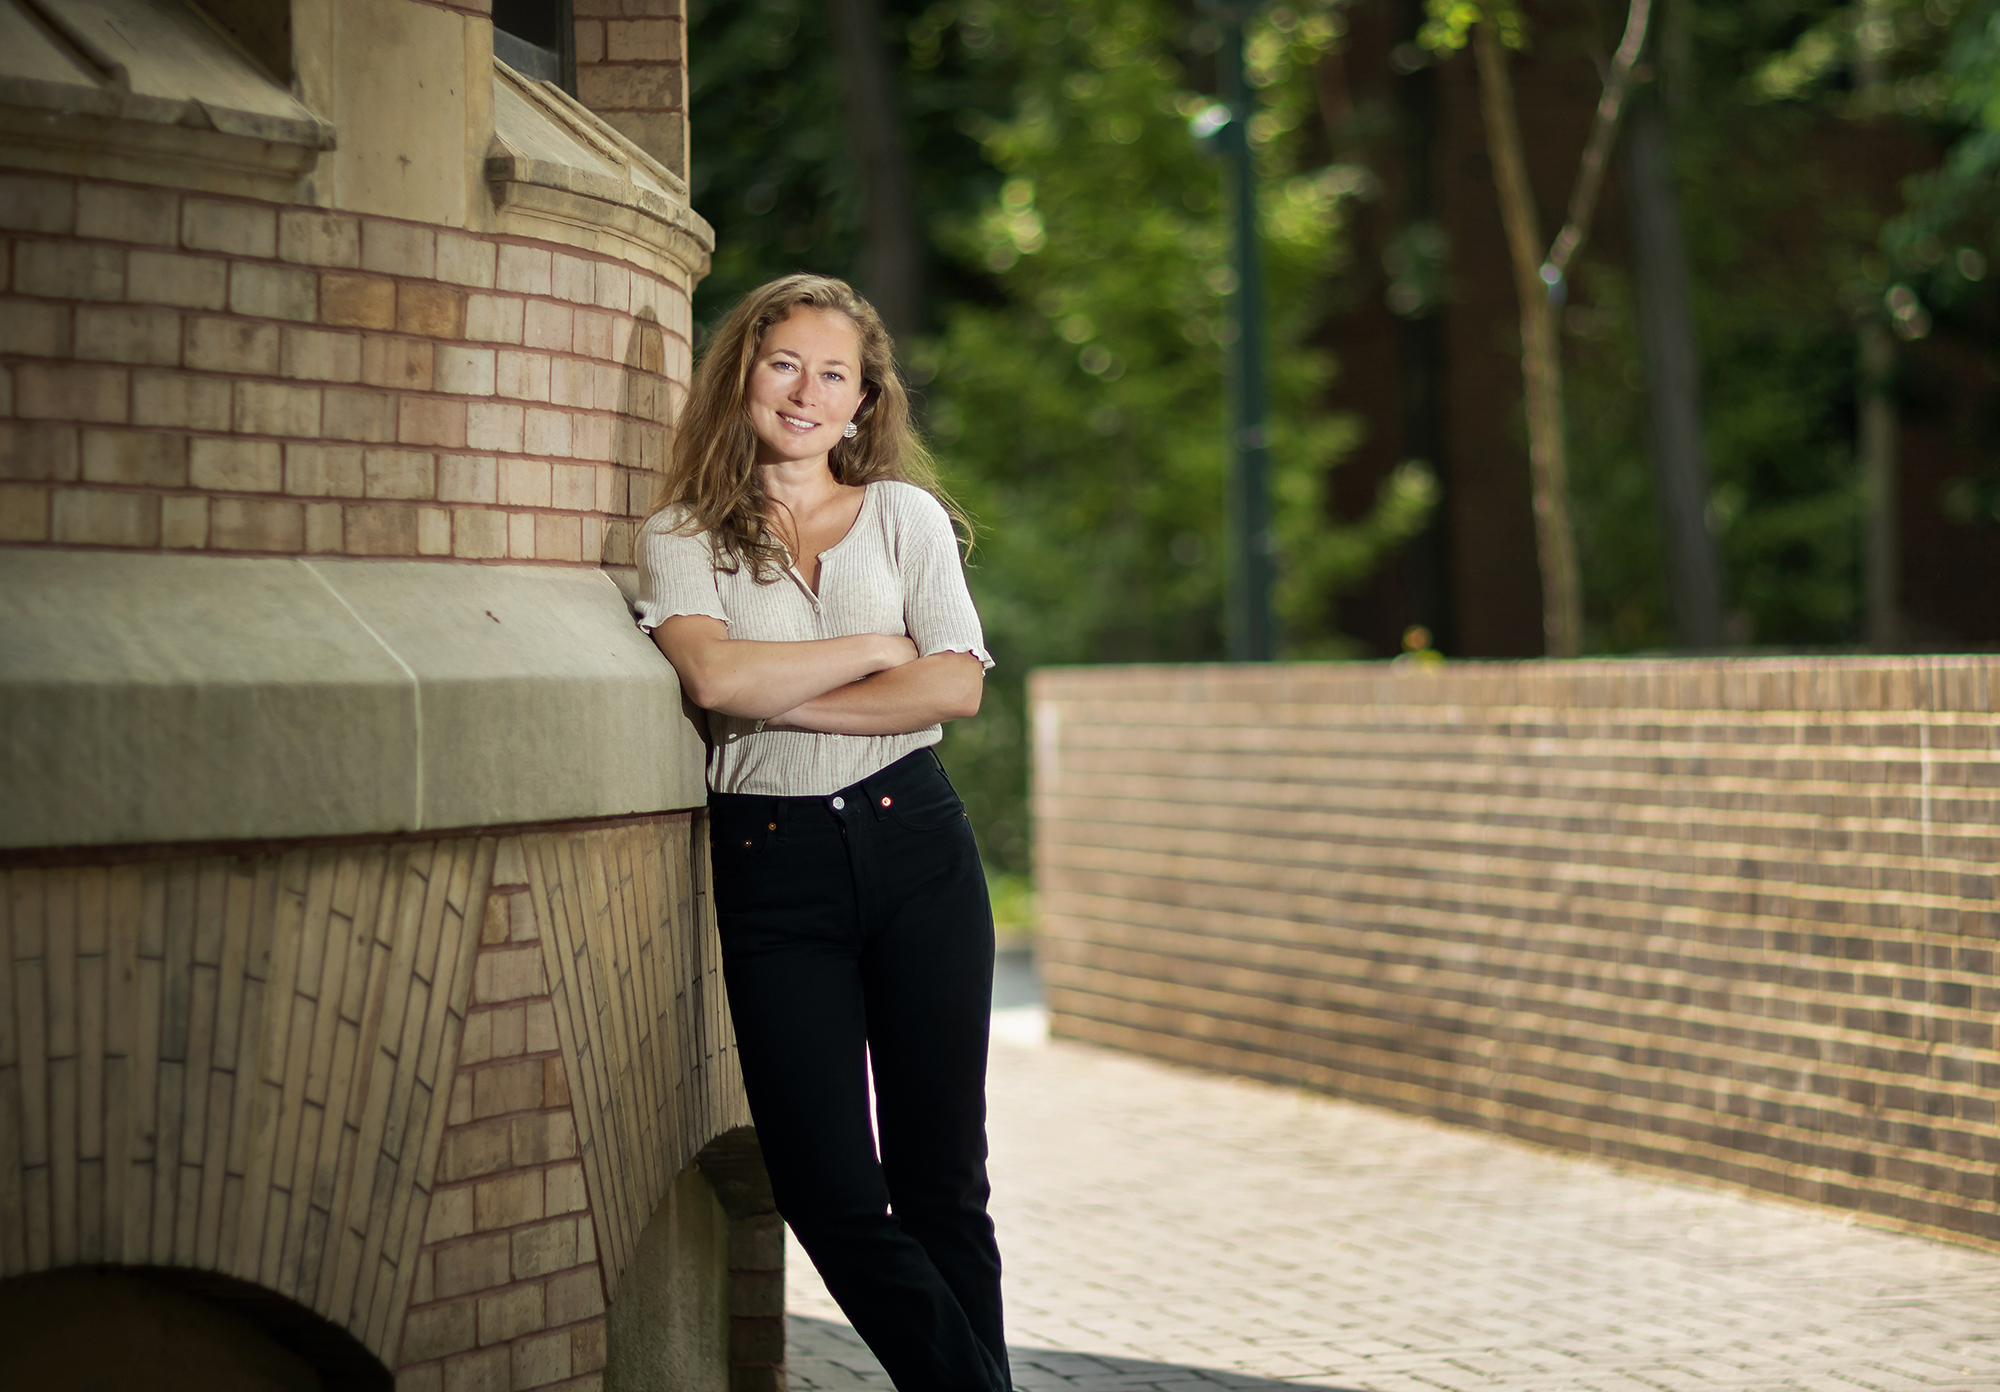 History Ph.D. candidate Arielle Alterwaite leans up against a light brown brick building with her arms crossed, smiling at the camera.